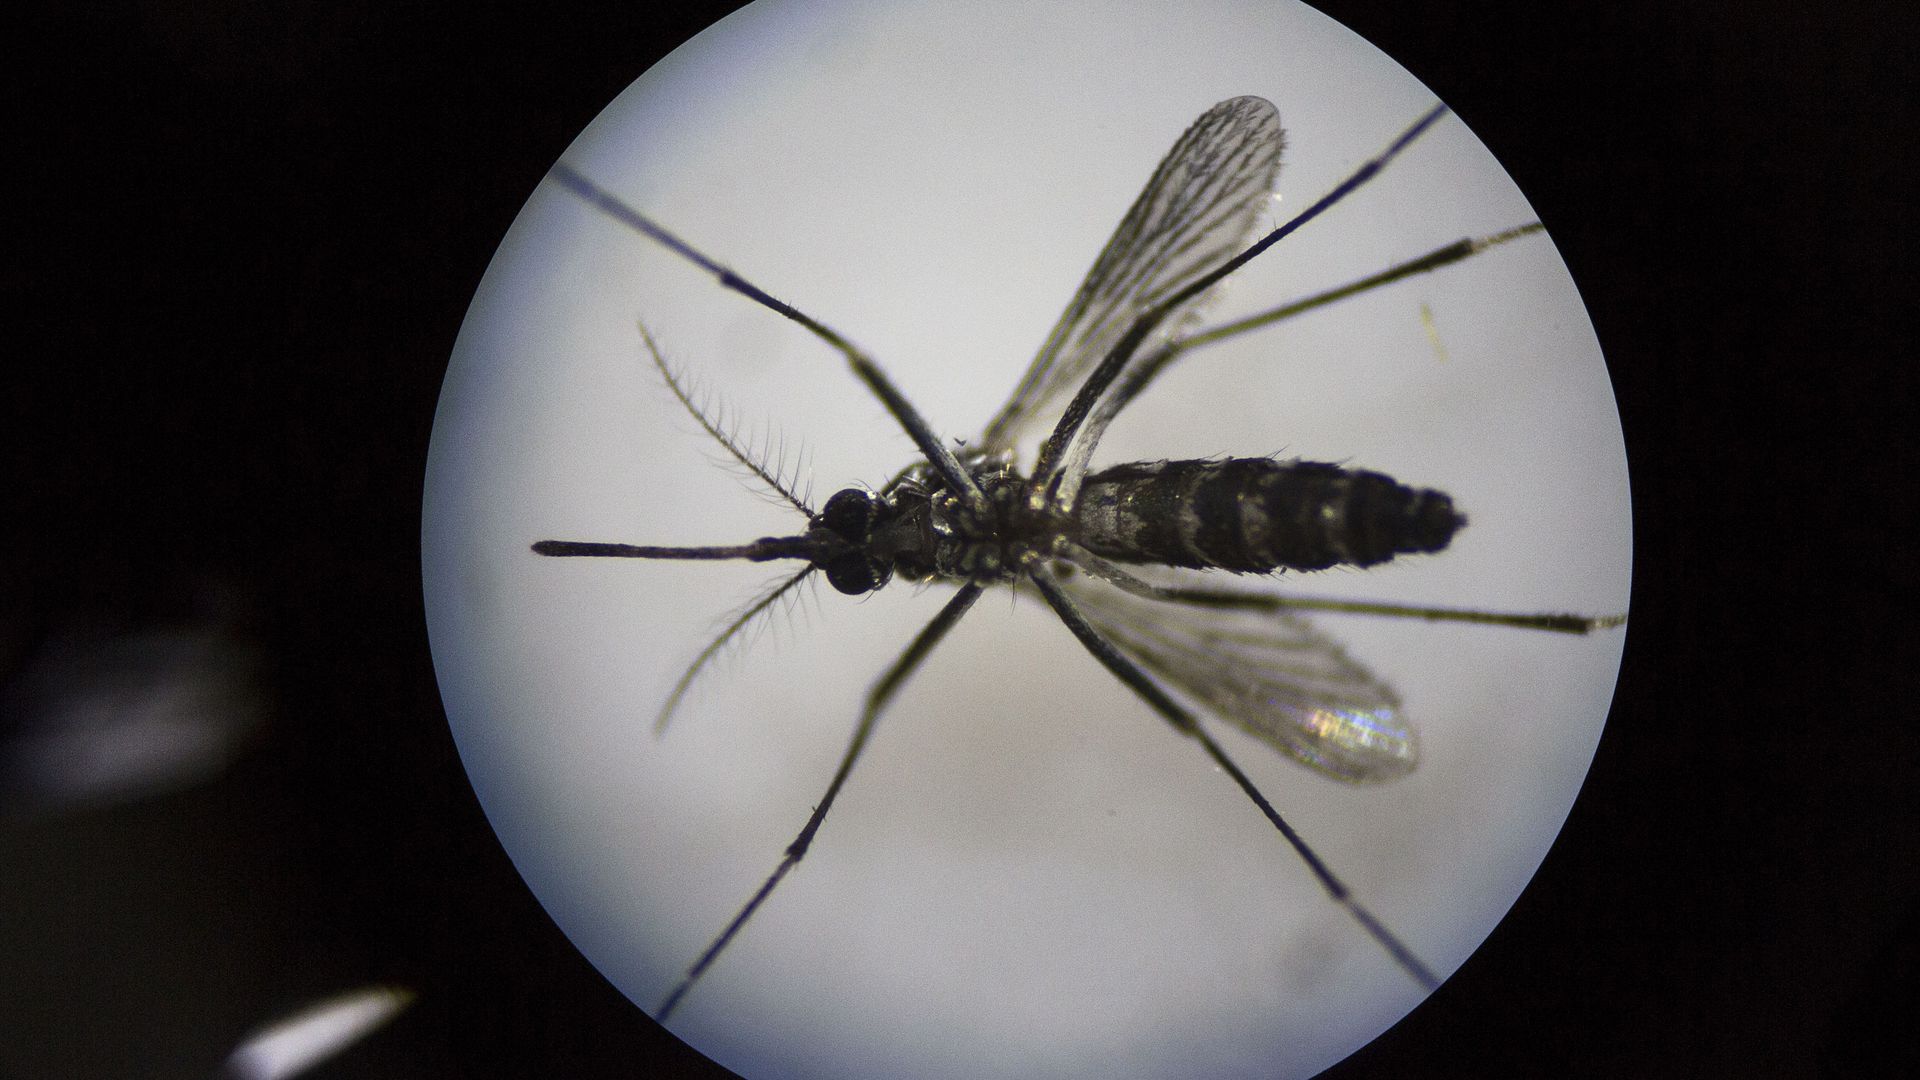 Photo of the Aedes albopictus mosquito seen under a microscope